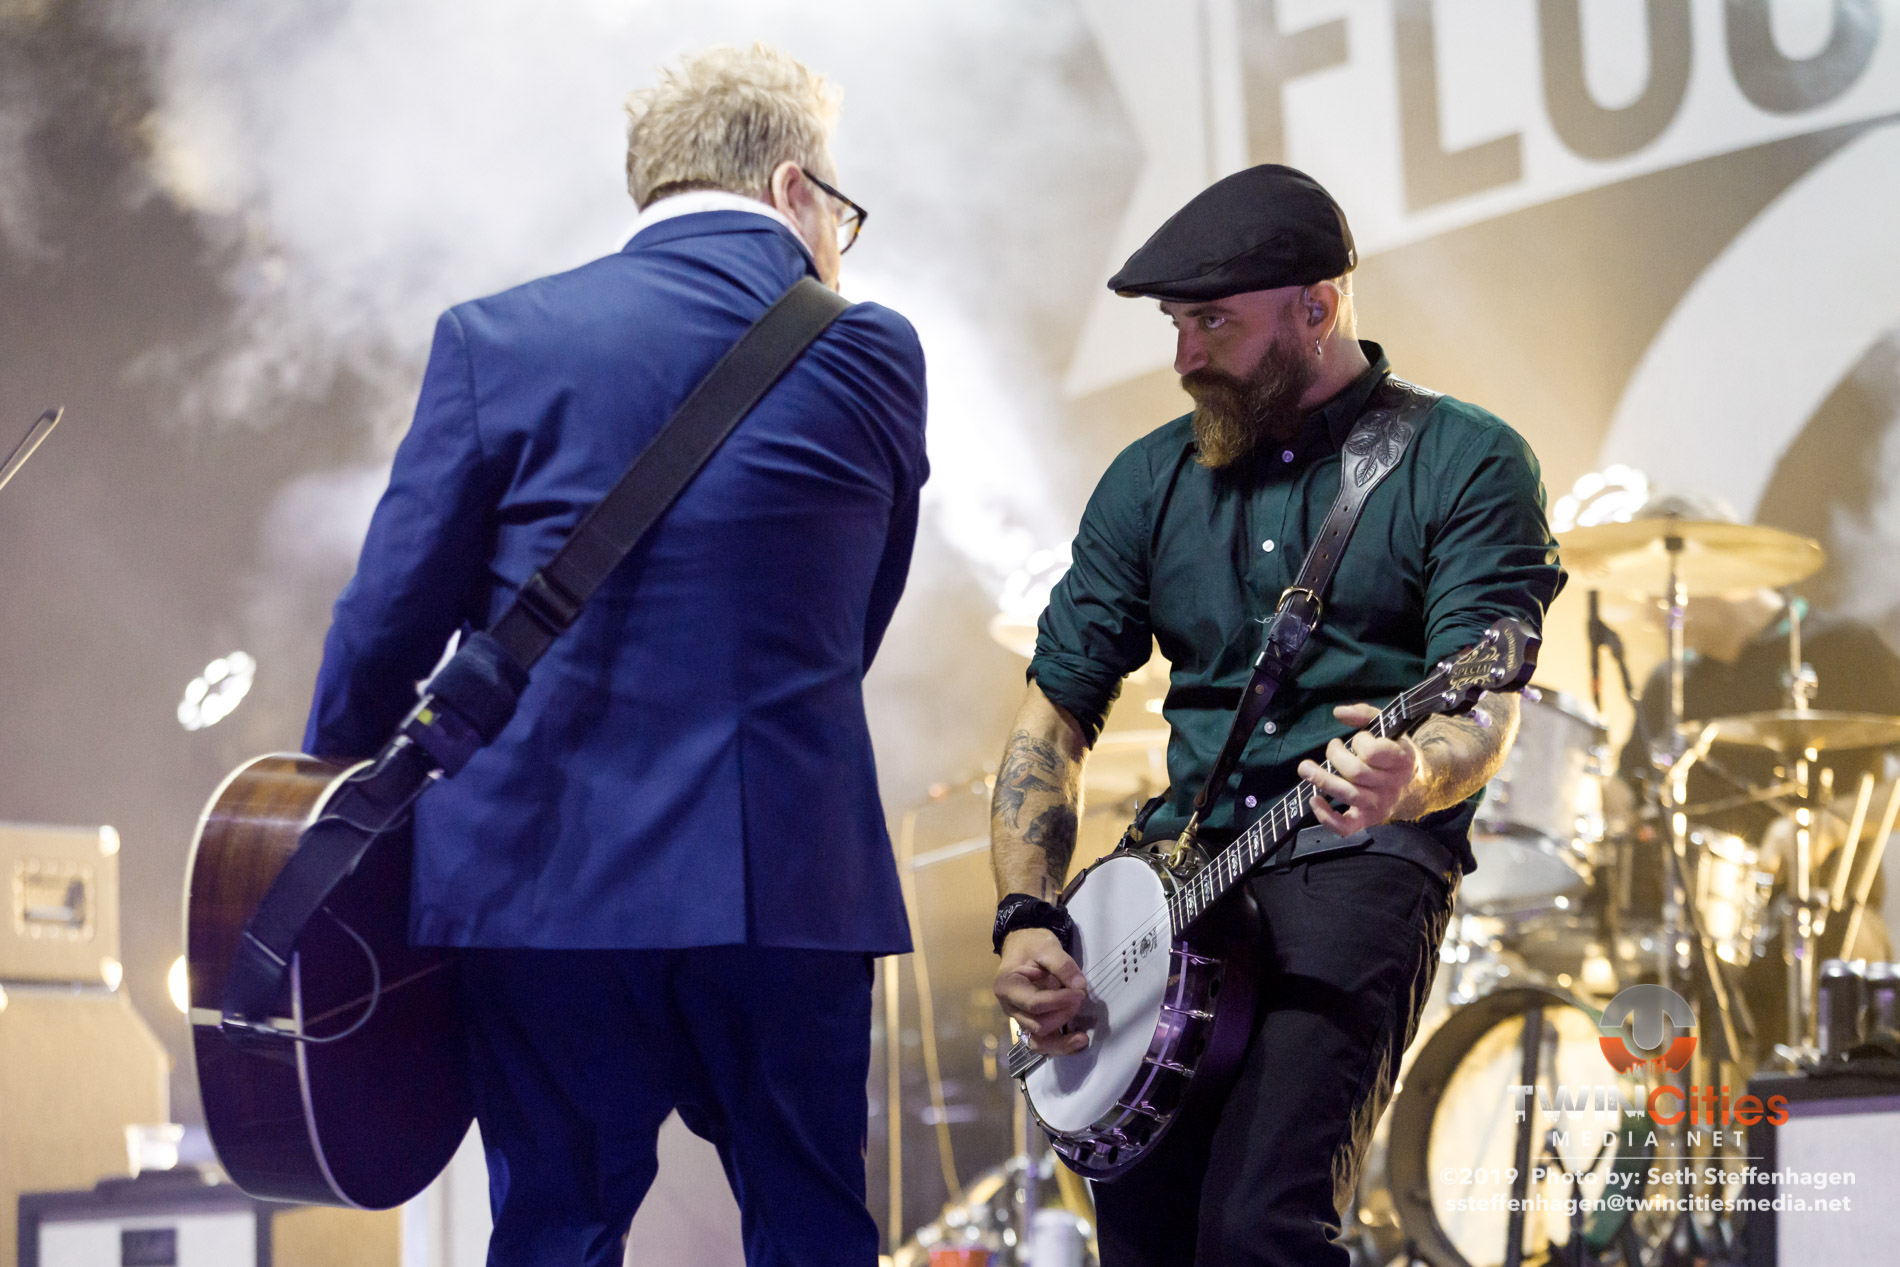 September 8, 2019 - Minneapolis, Minnesota, United States - Flogging Molly live in concert at the The Armory. Co-headlining with Social Distortion along with The Devil Makes Three and Le Butcherettes as the openers.

(Photo by Seth Steffenhagen/Steffenhagen Photography)